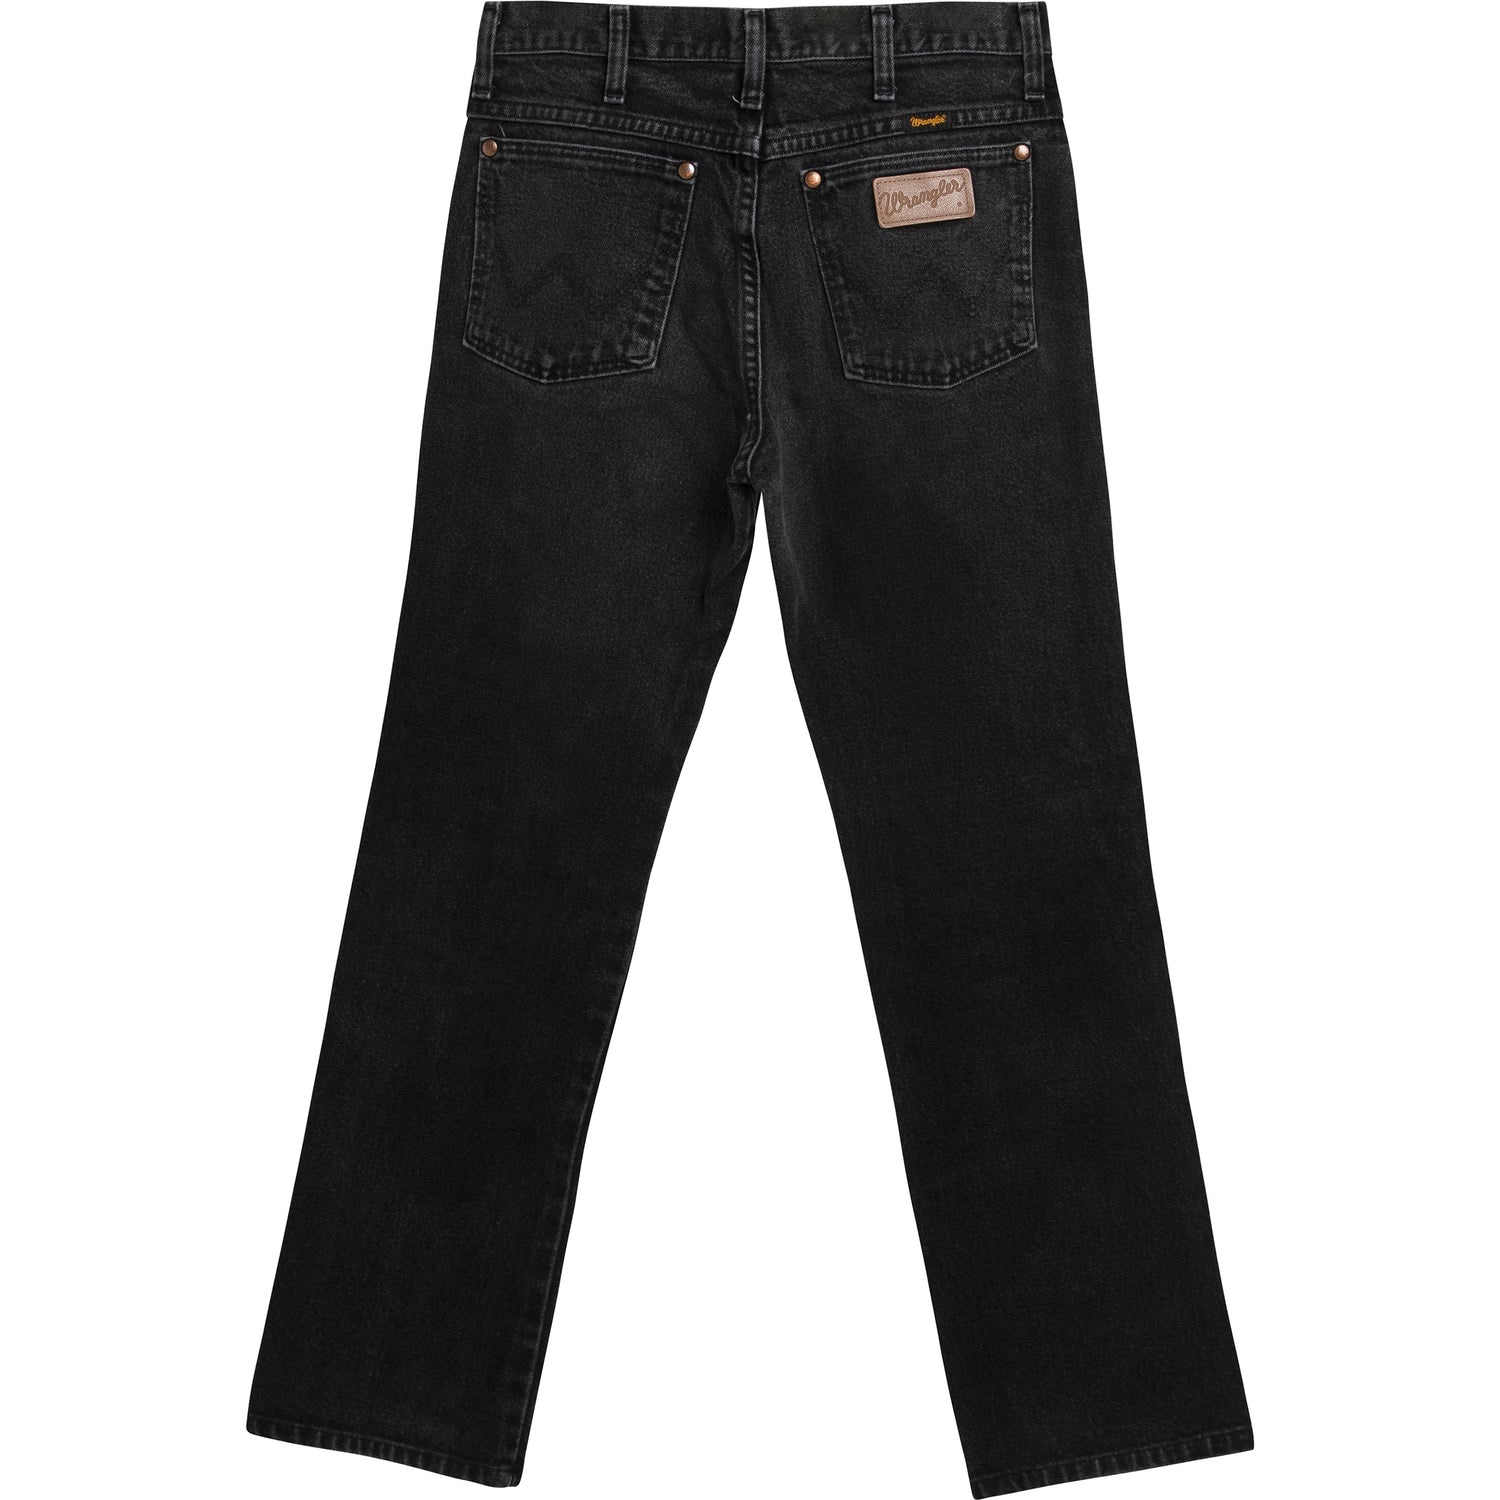 VINTAGE WRANGLER JEANS - MORE SIZES AVAILABLE